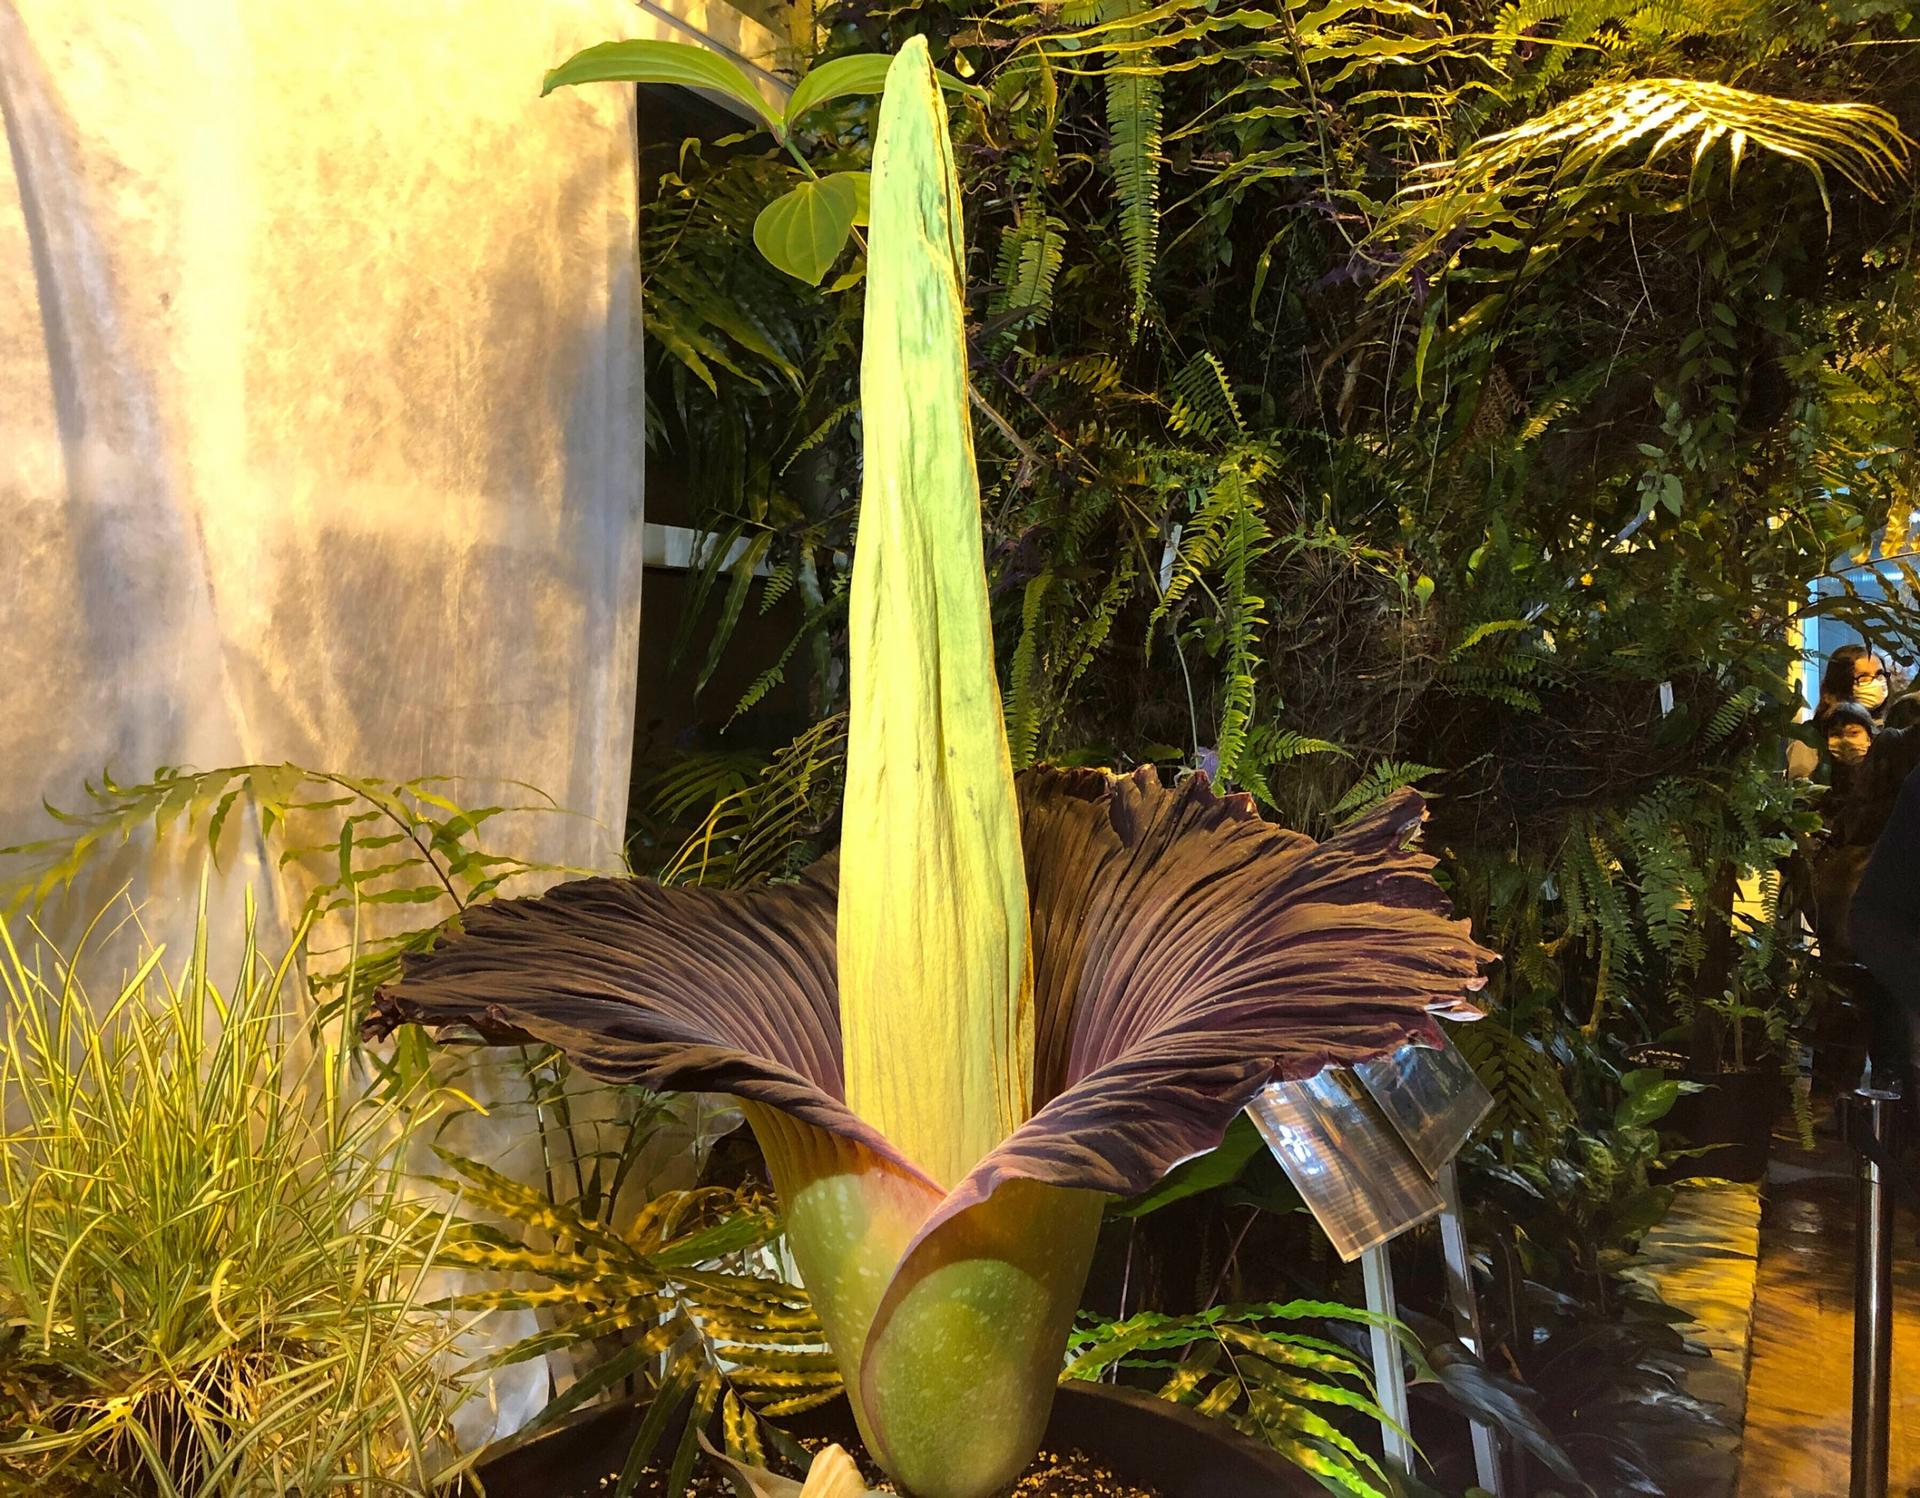 The tall yelllow blossom of the corpse flower is shown with purple, brown and green leaves.